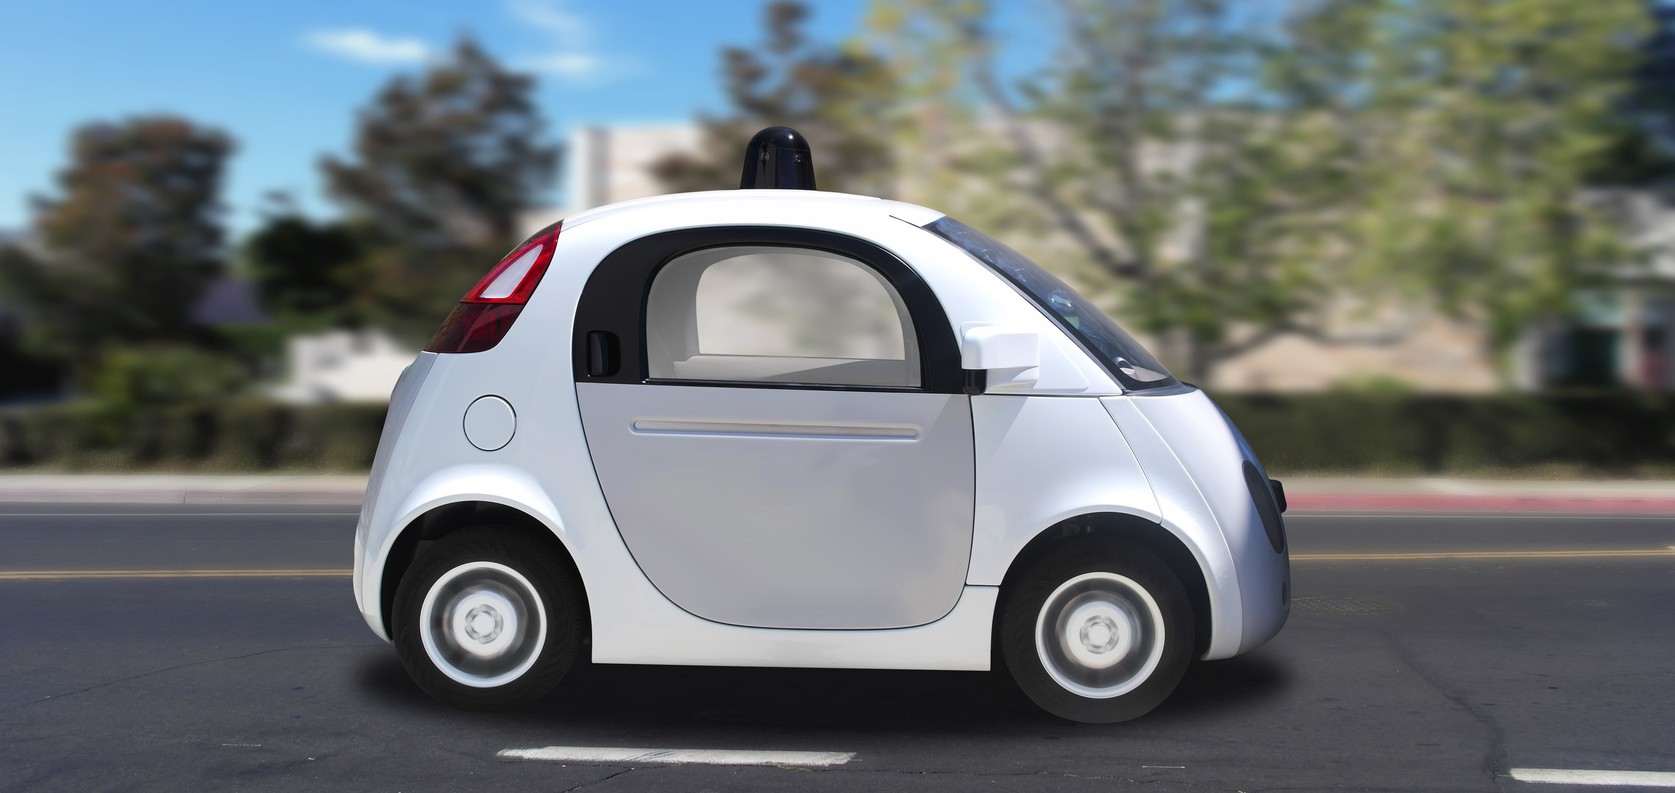 Autonomous self-driving driverless vehicle on the road